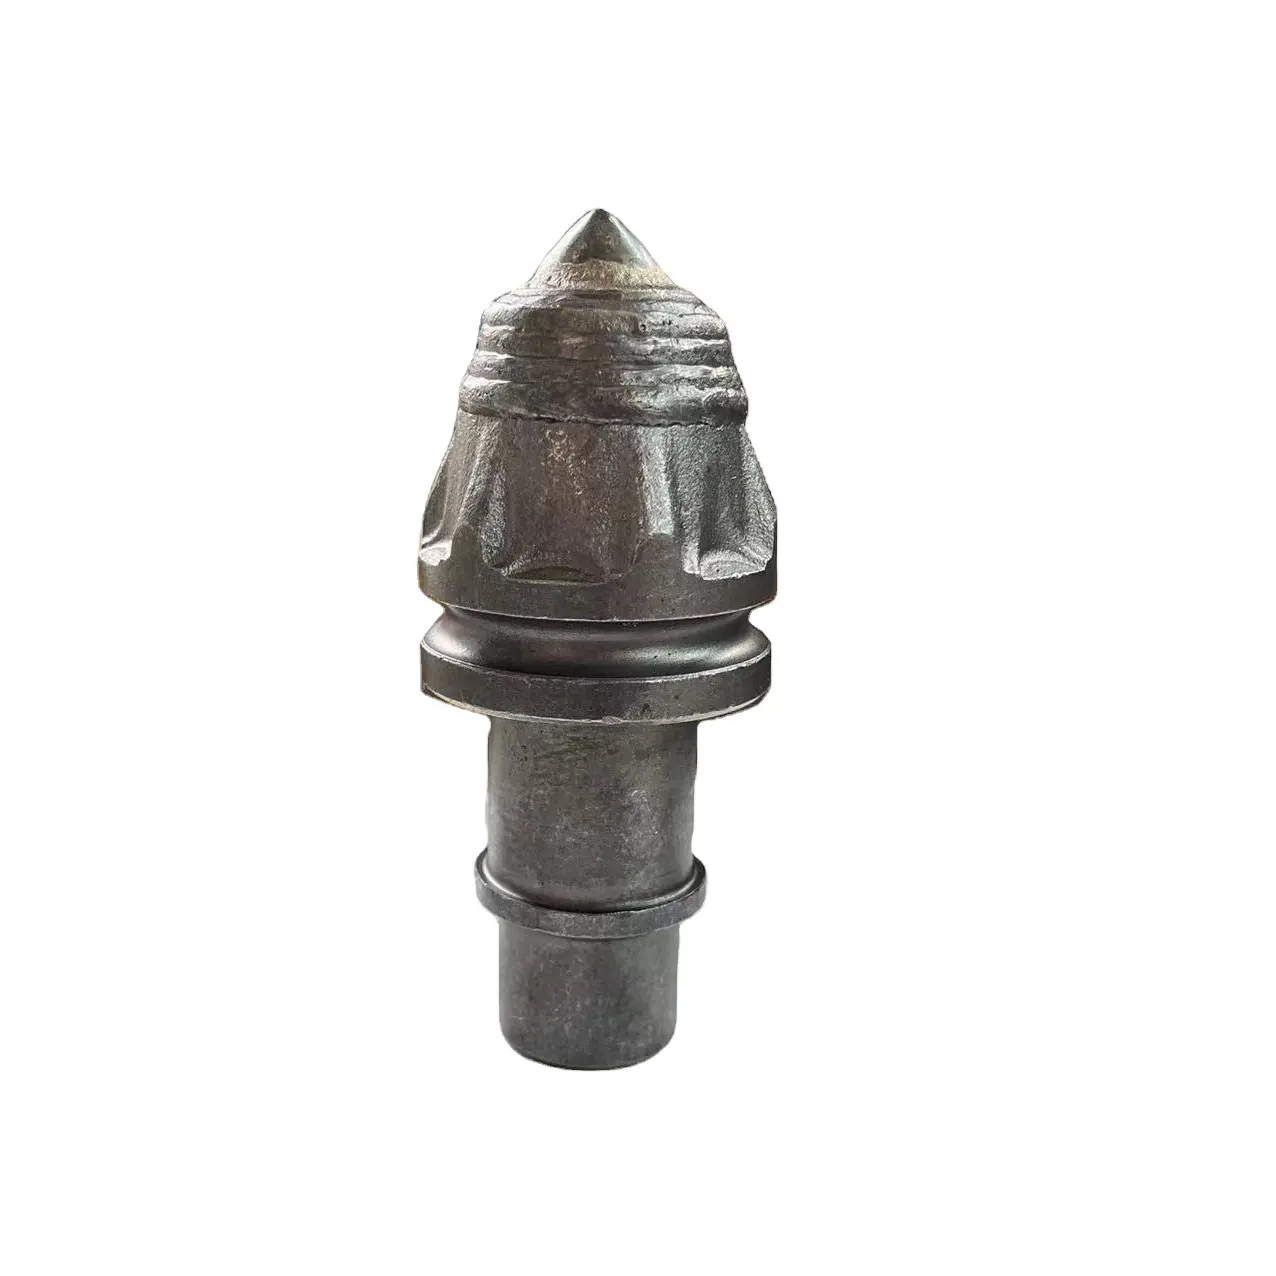 Construction Machinery Parts Drill Auger Bullet Teeth round Rotary Chisel Bits for Foundation Pilings